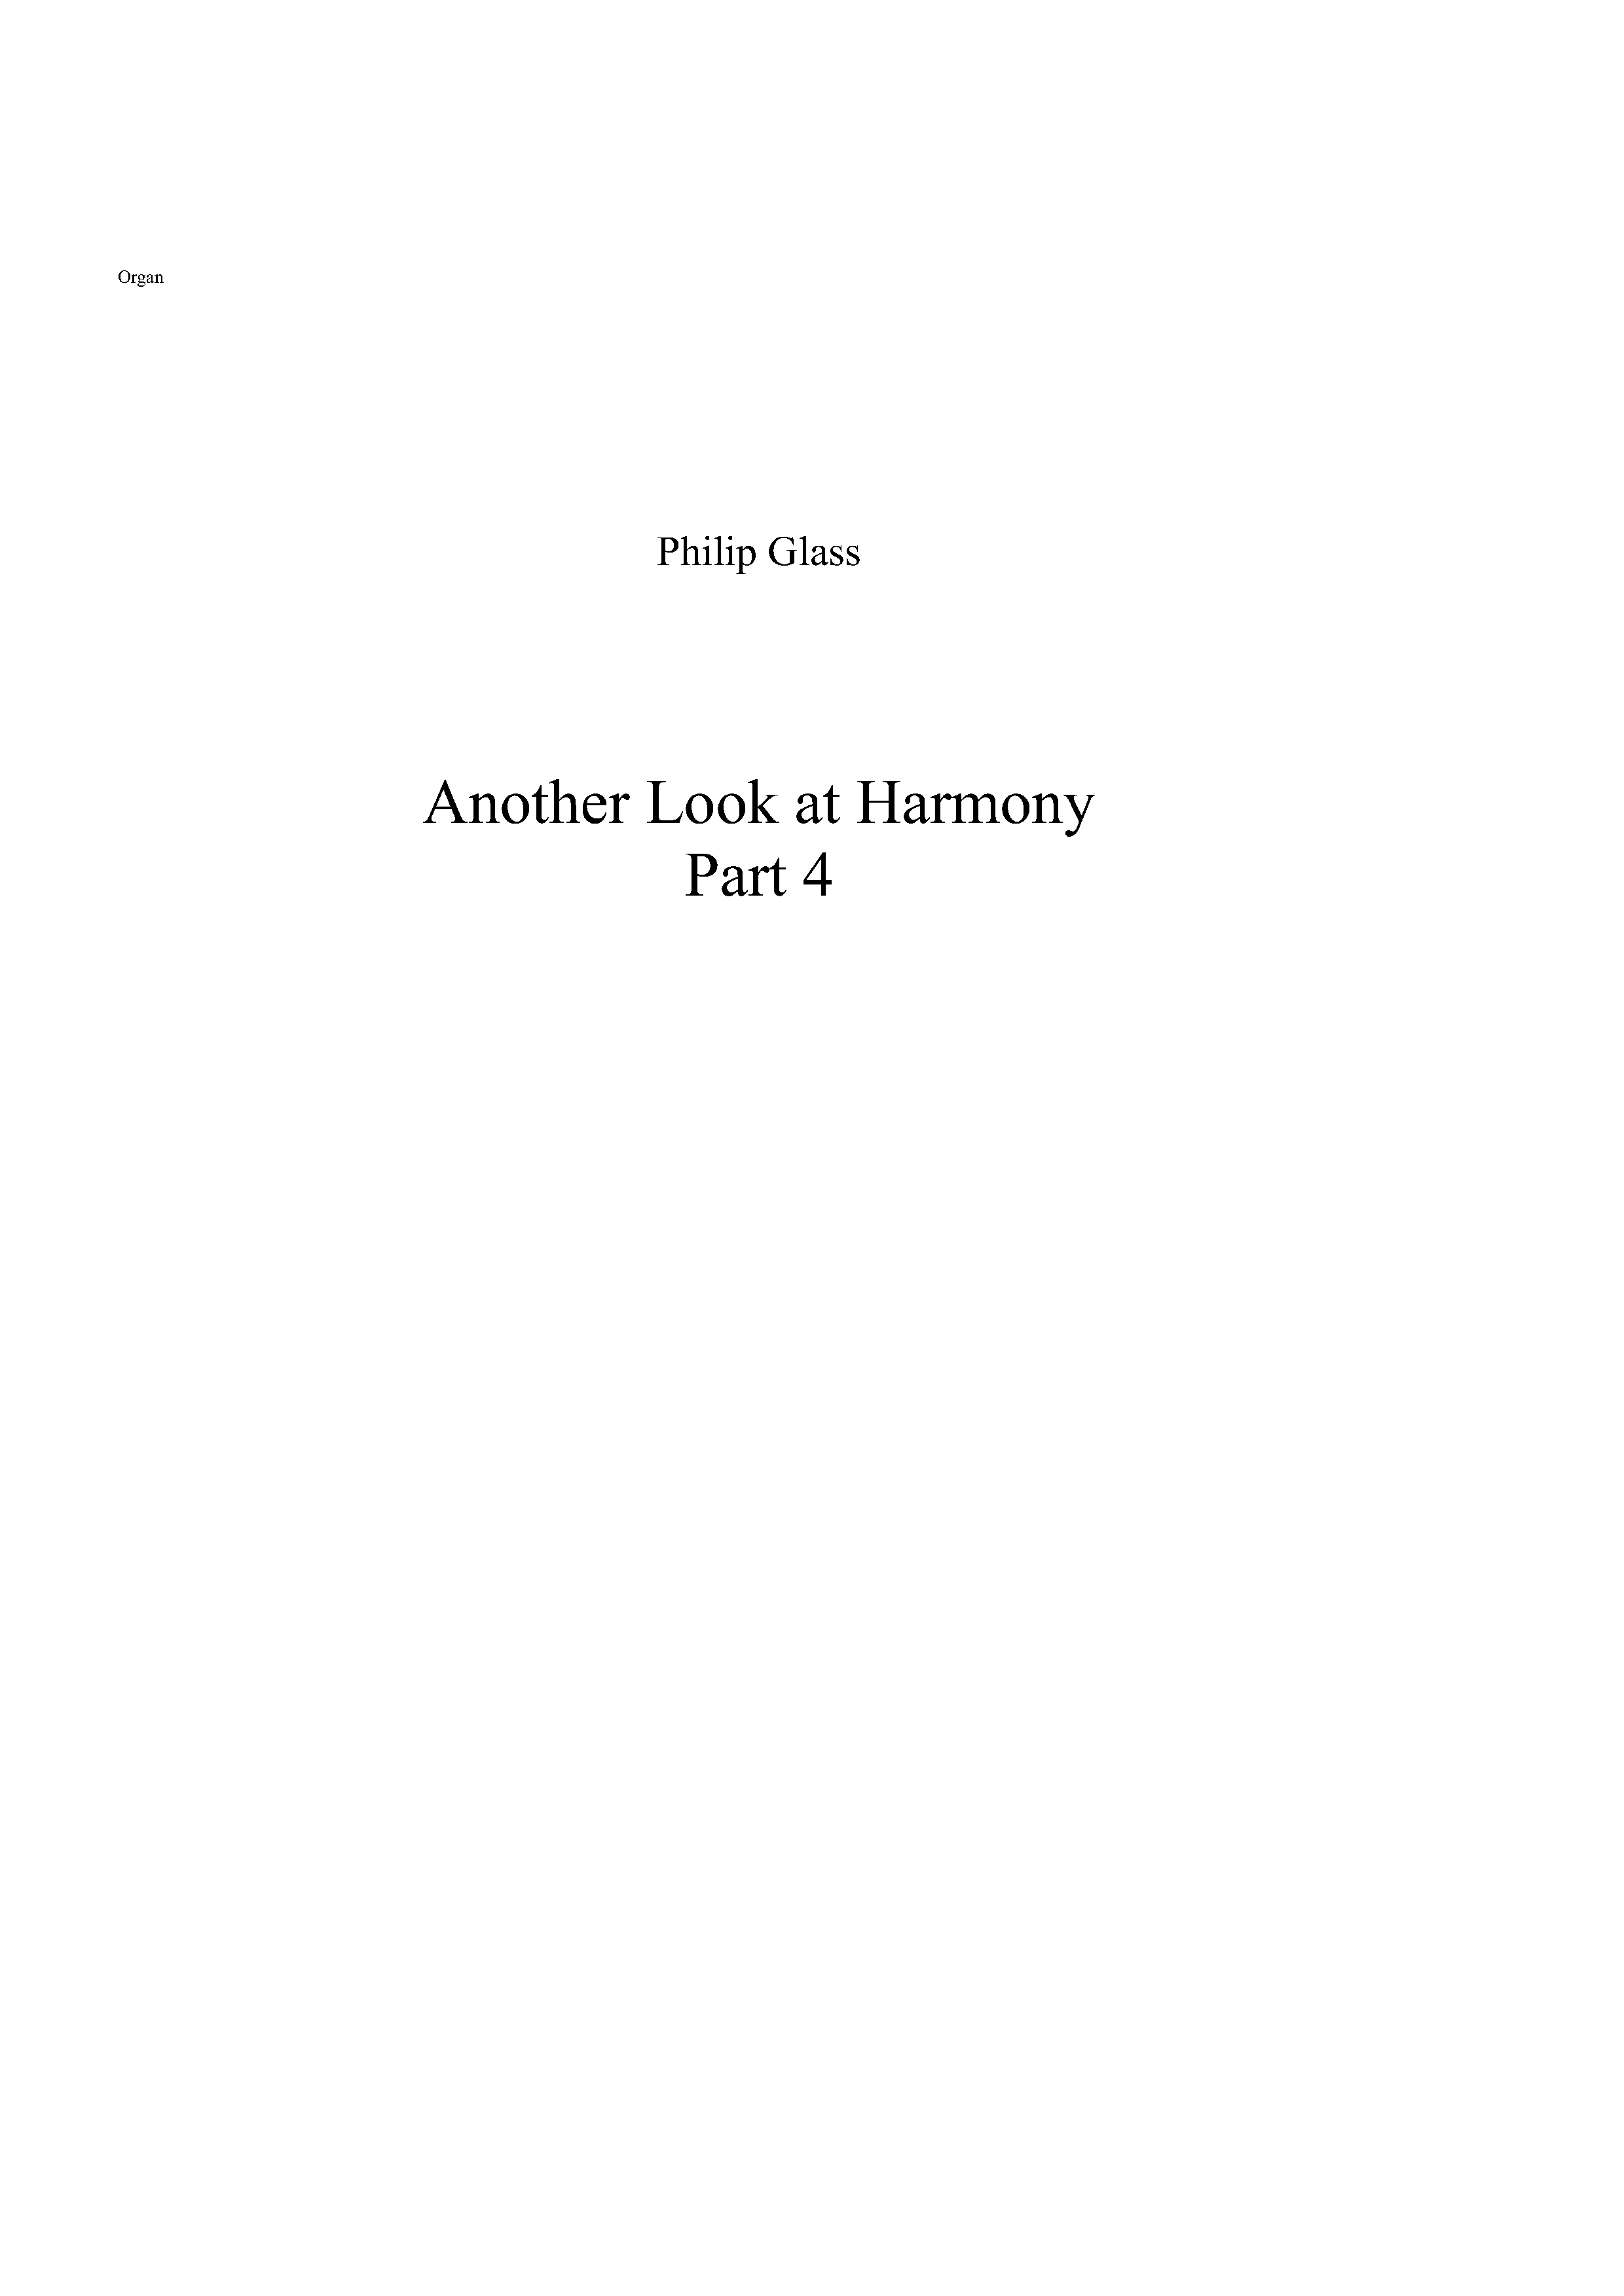 Philip Glass: Another Look at Harmony - Part 4: Organ: Part